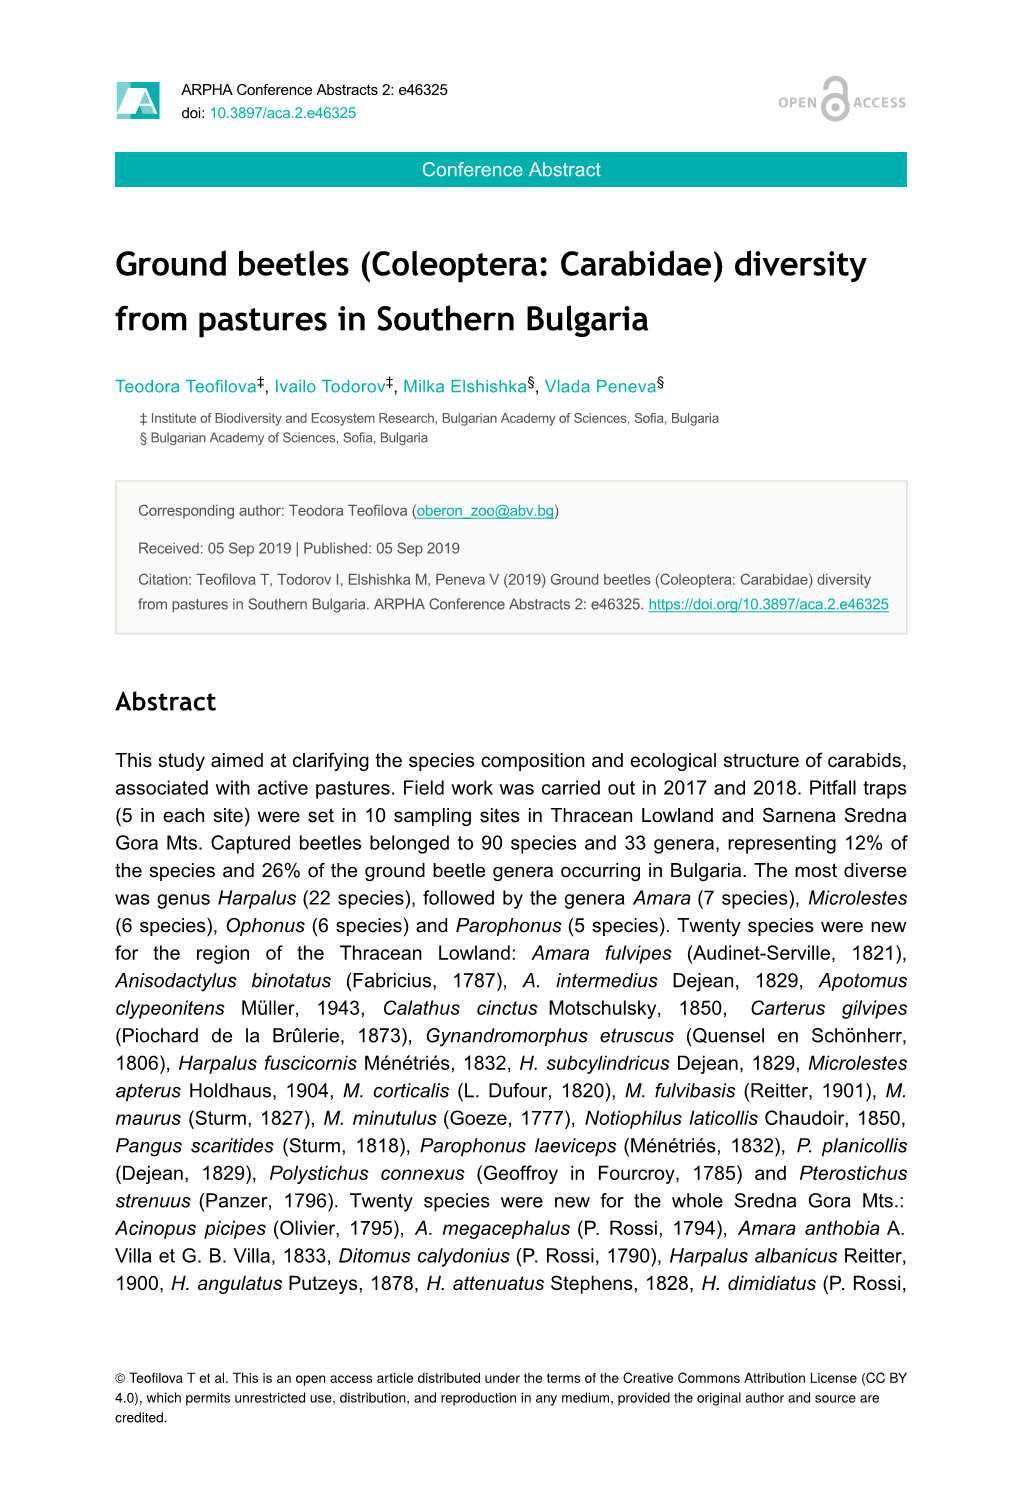 Ground Beetles (Coleoptera: Carabidae) Diversity from Pastures in Southern Bulgaria